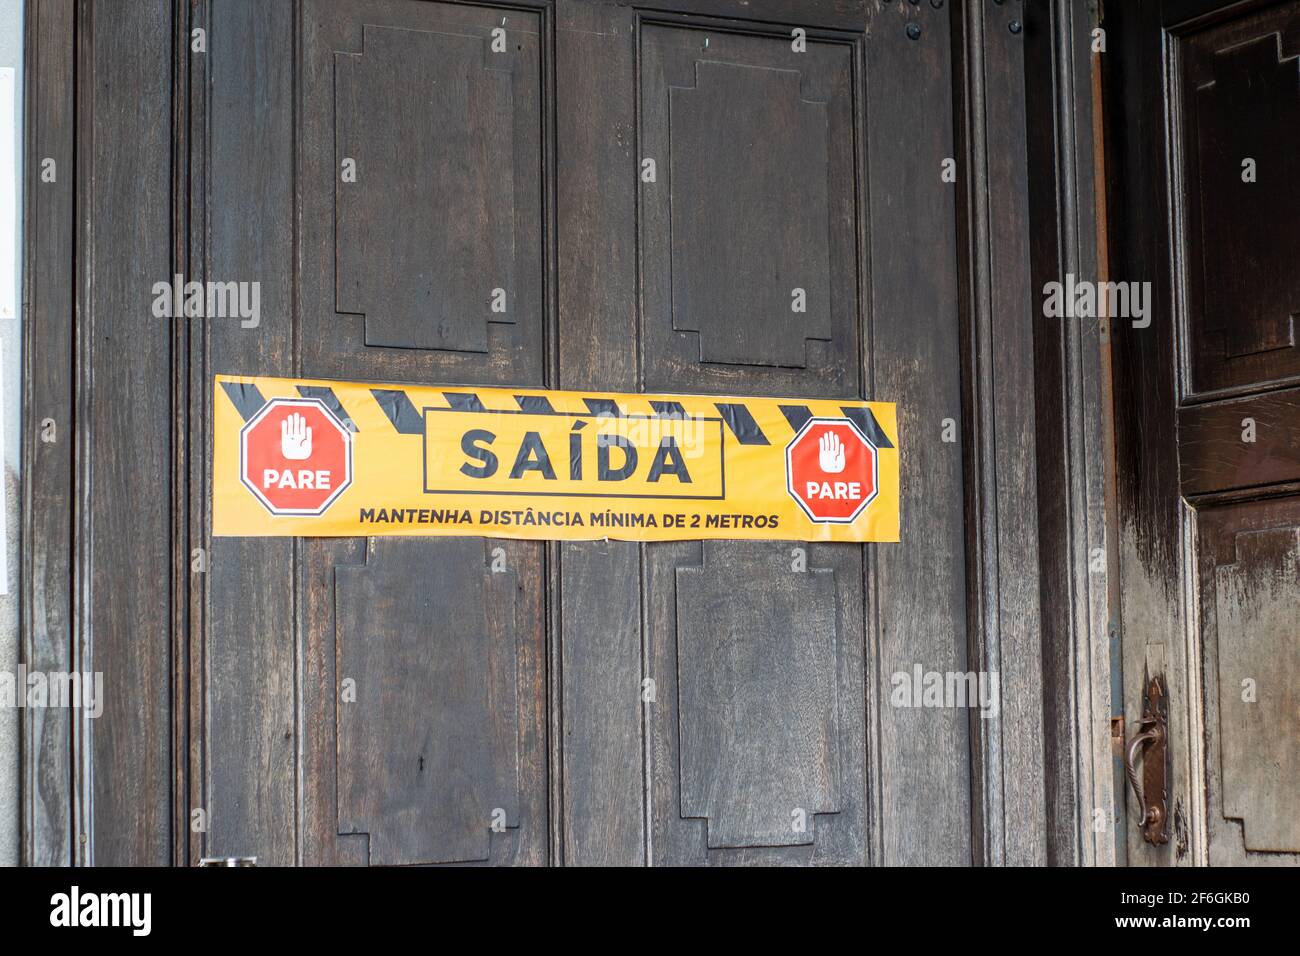 Church Exit door sticker in portuguese churches in times of coronavirus, keep two meters distance stickers Stock Photo